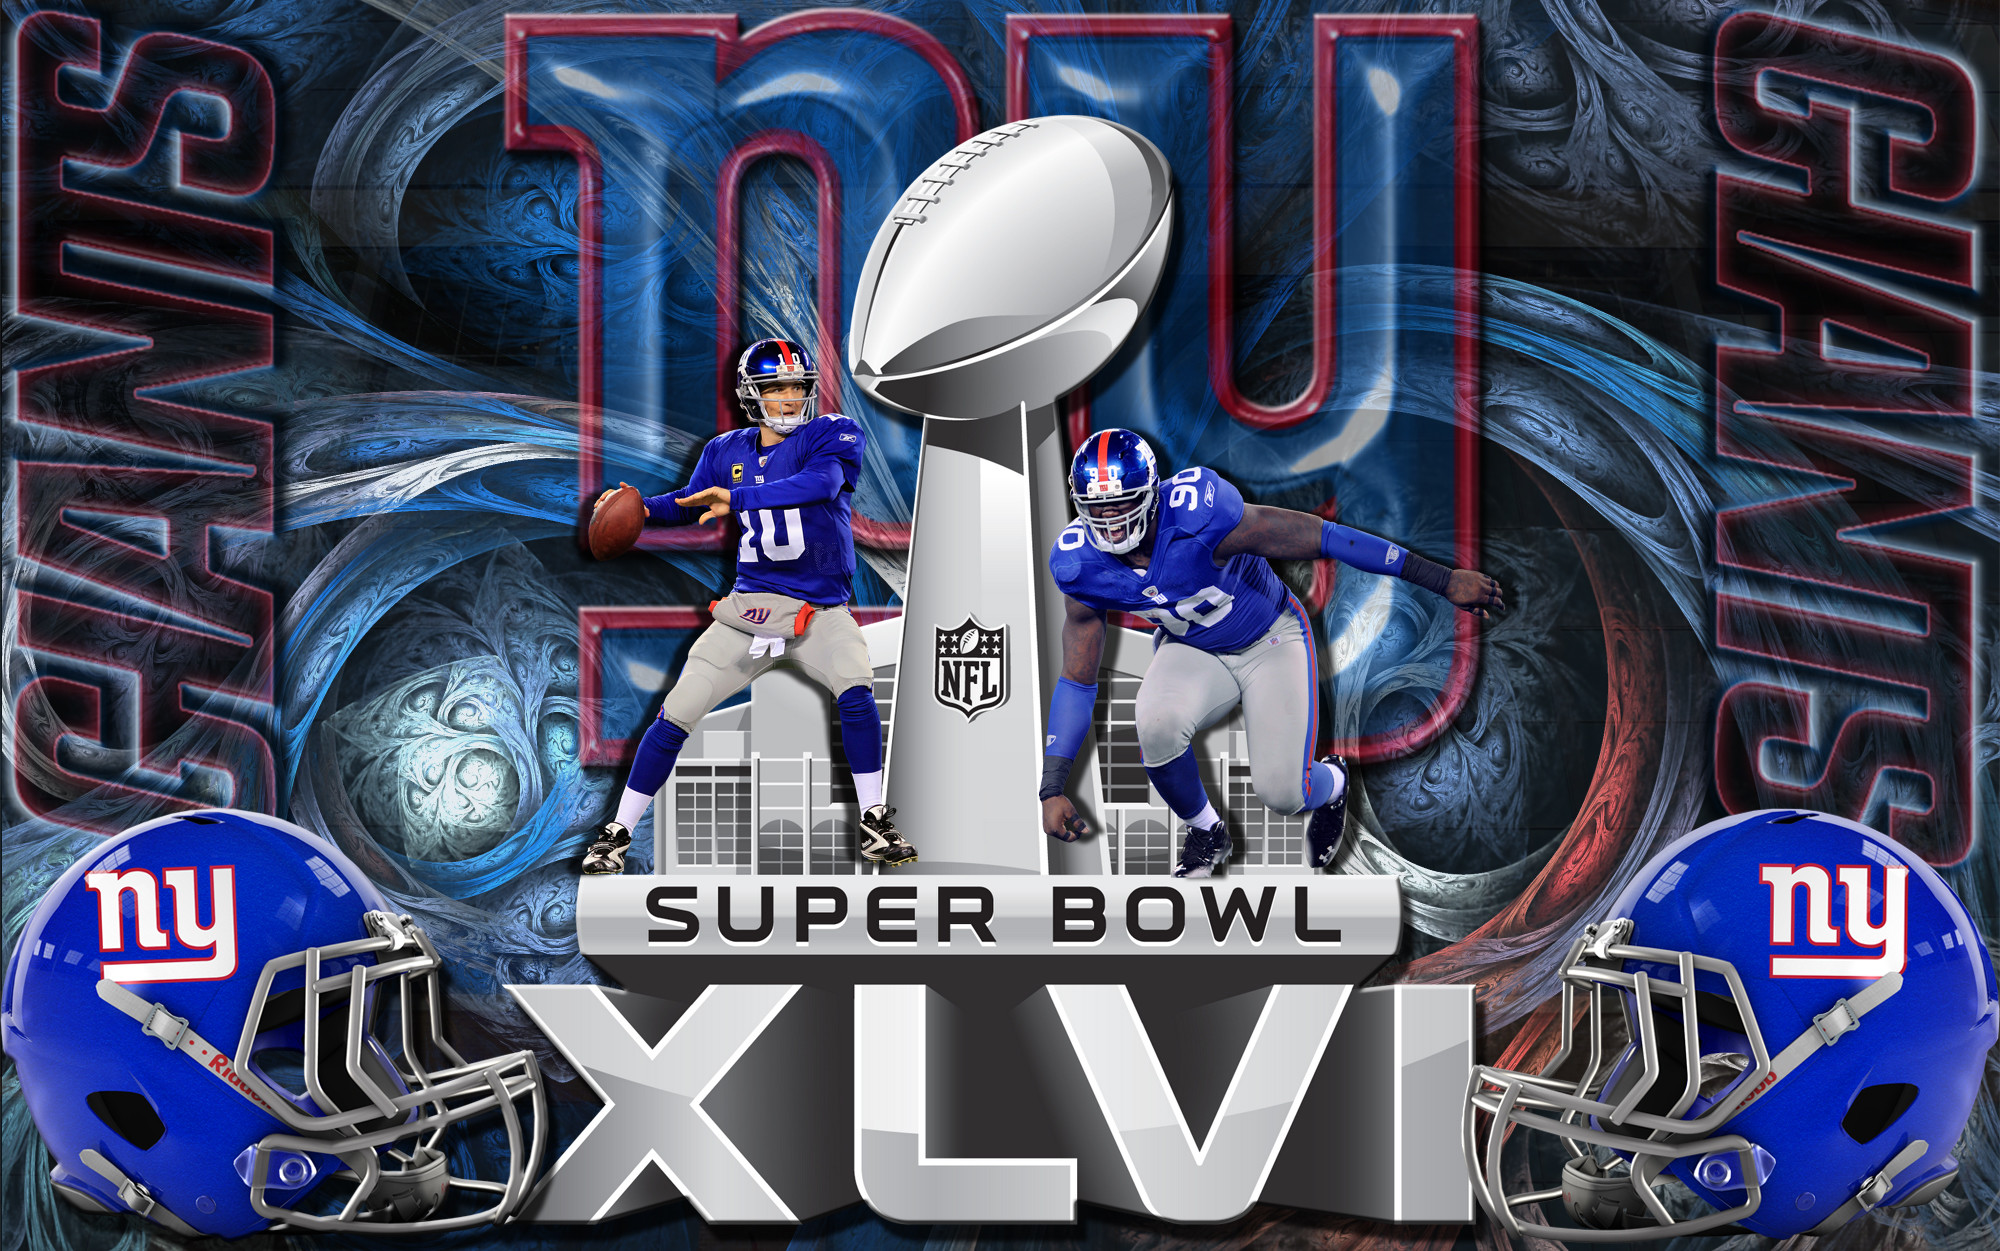 2000x1251 images about ny giants on pinterest new york giants